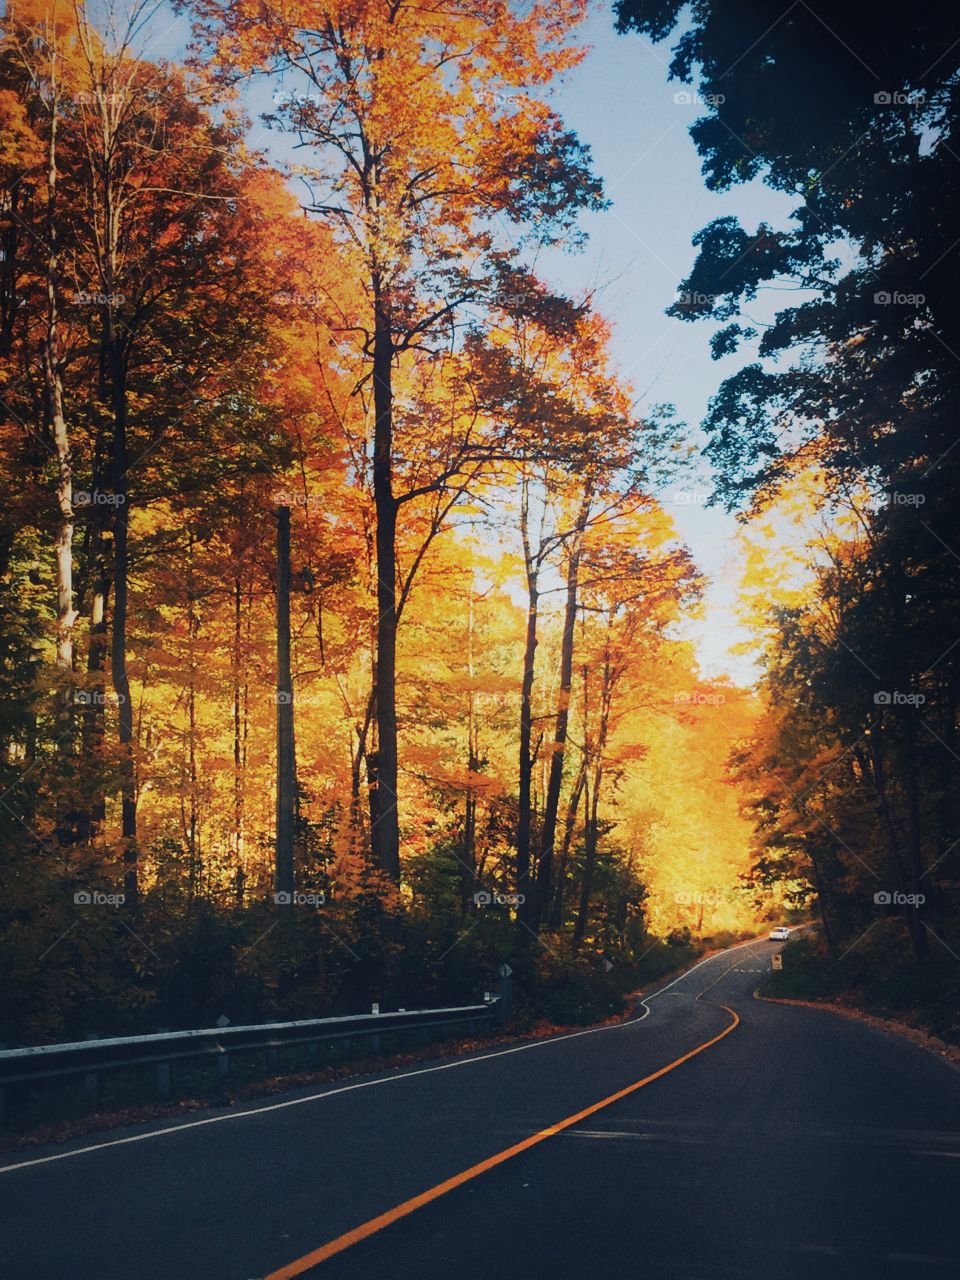 Testing out my new iPhone camera.  Fall drive in the country 